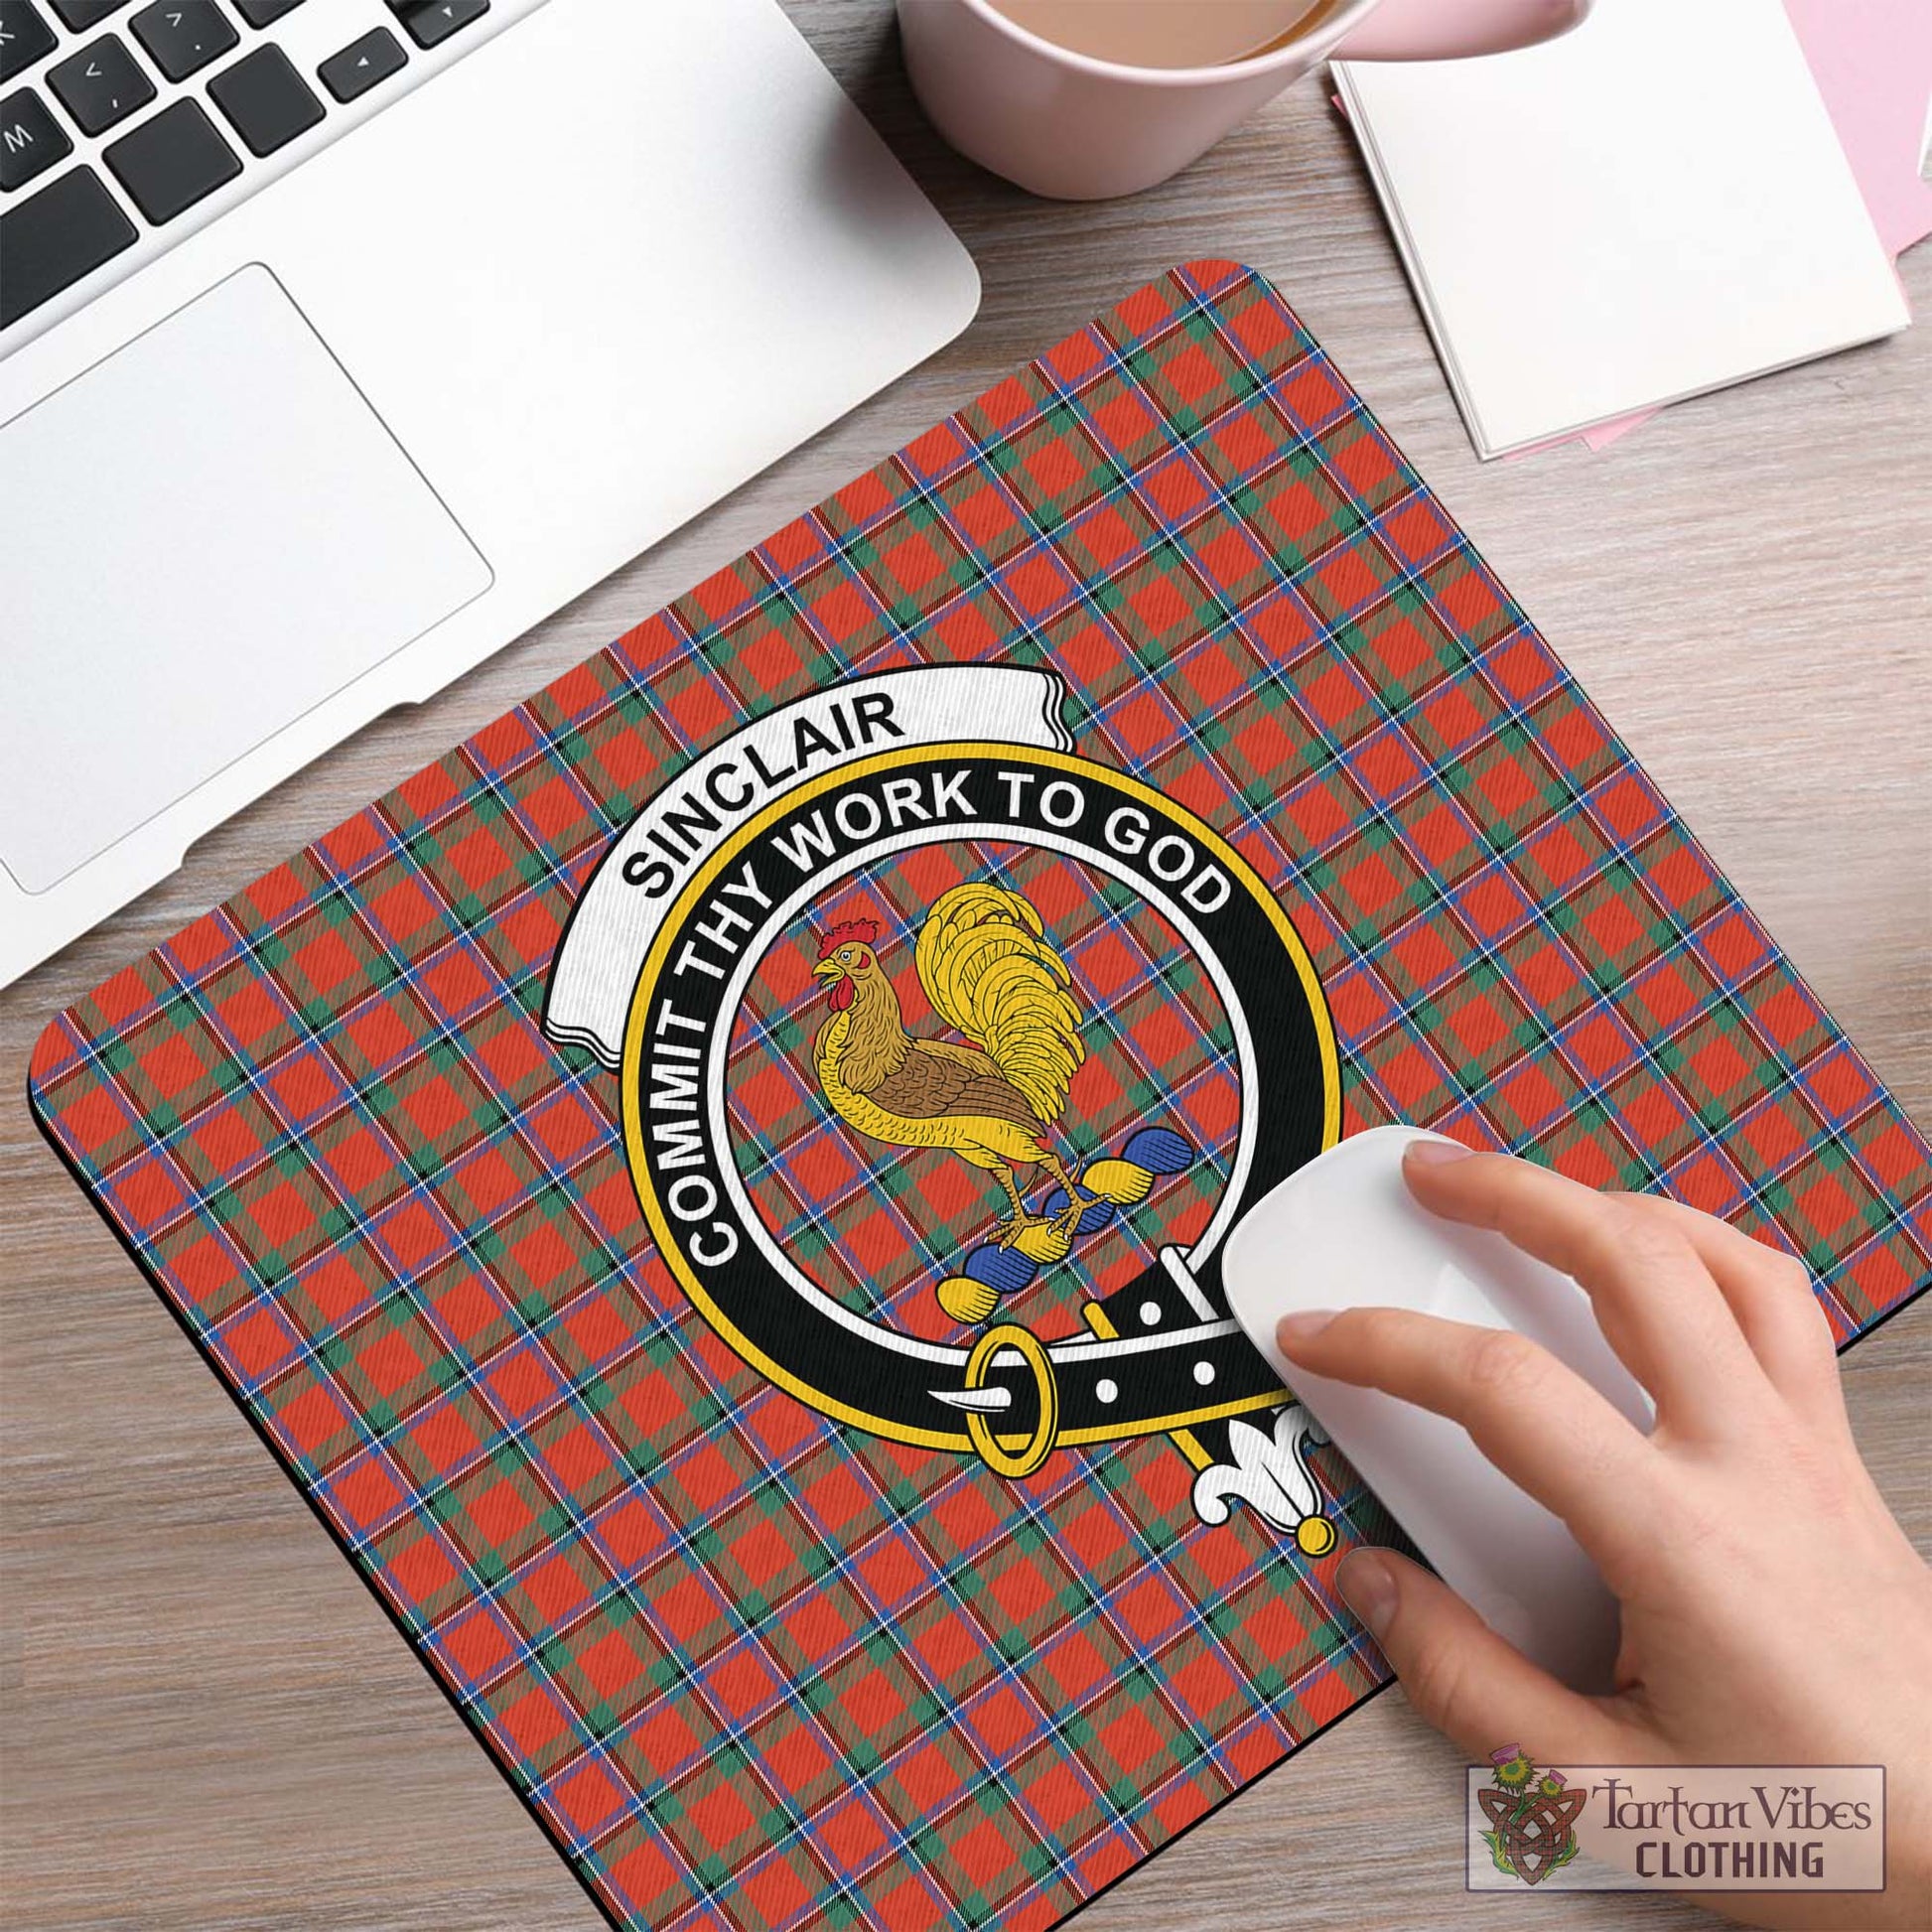 Tartan Vibes Clothing Sinclair Ancient Tartan Mouse Pad with Family Crest